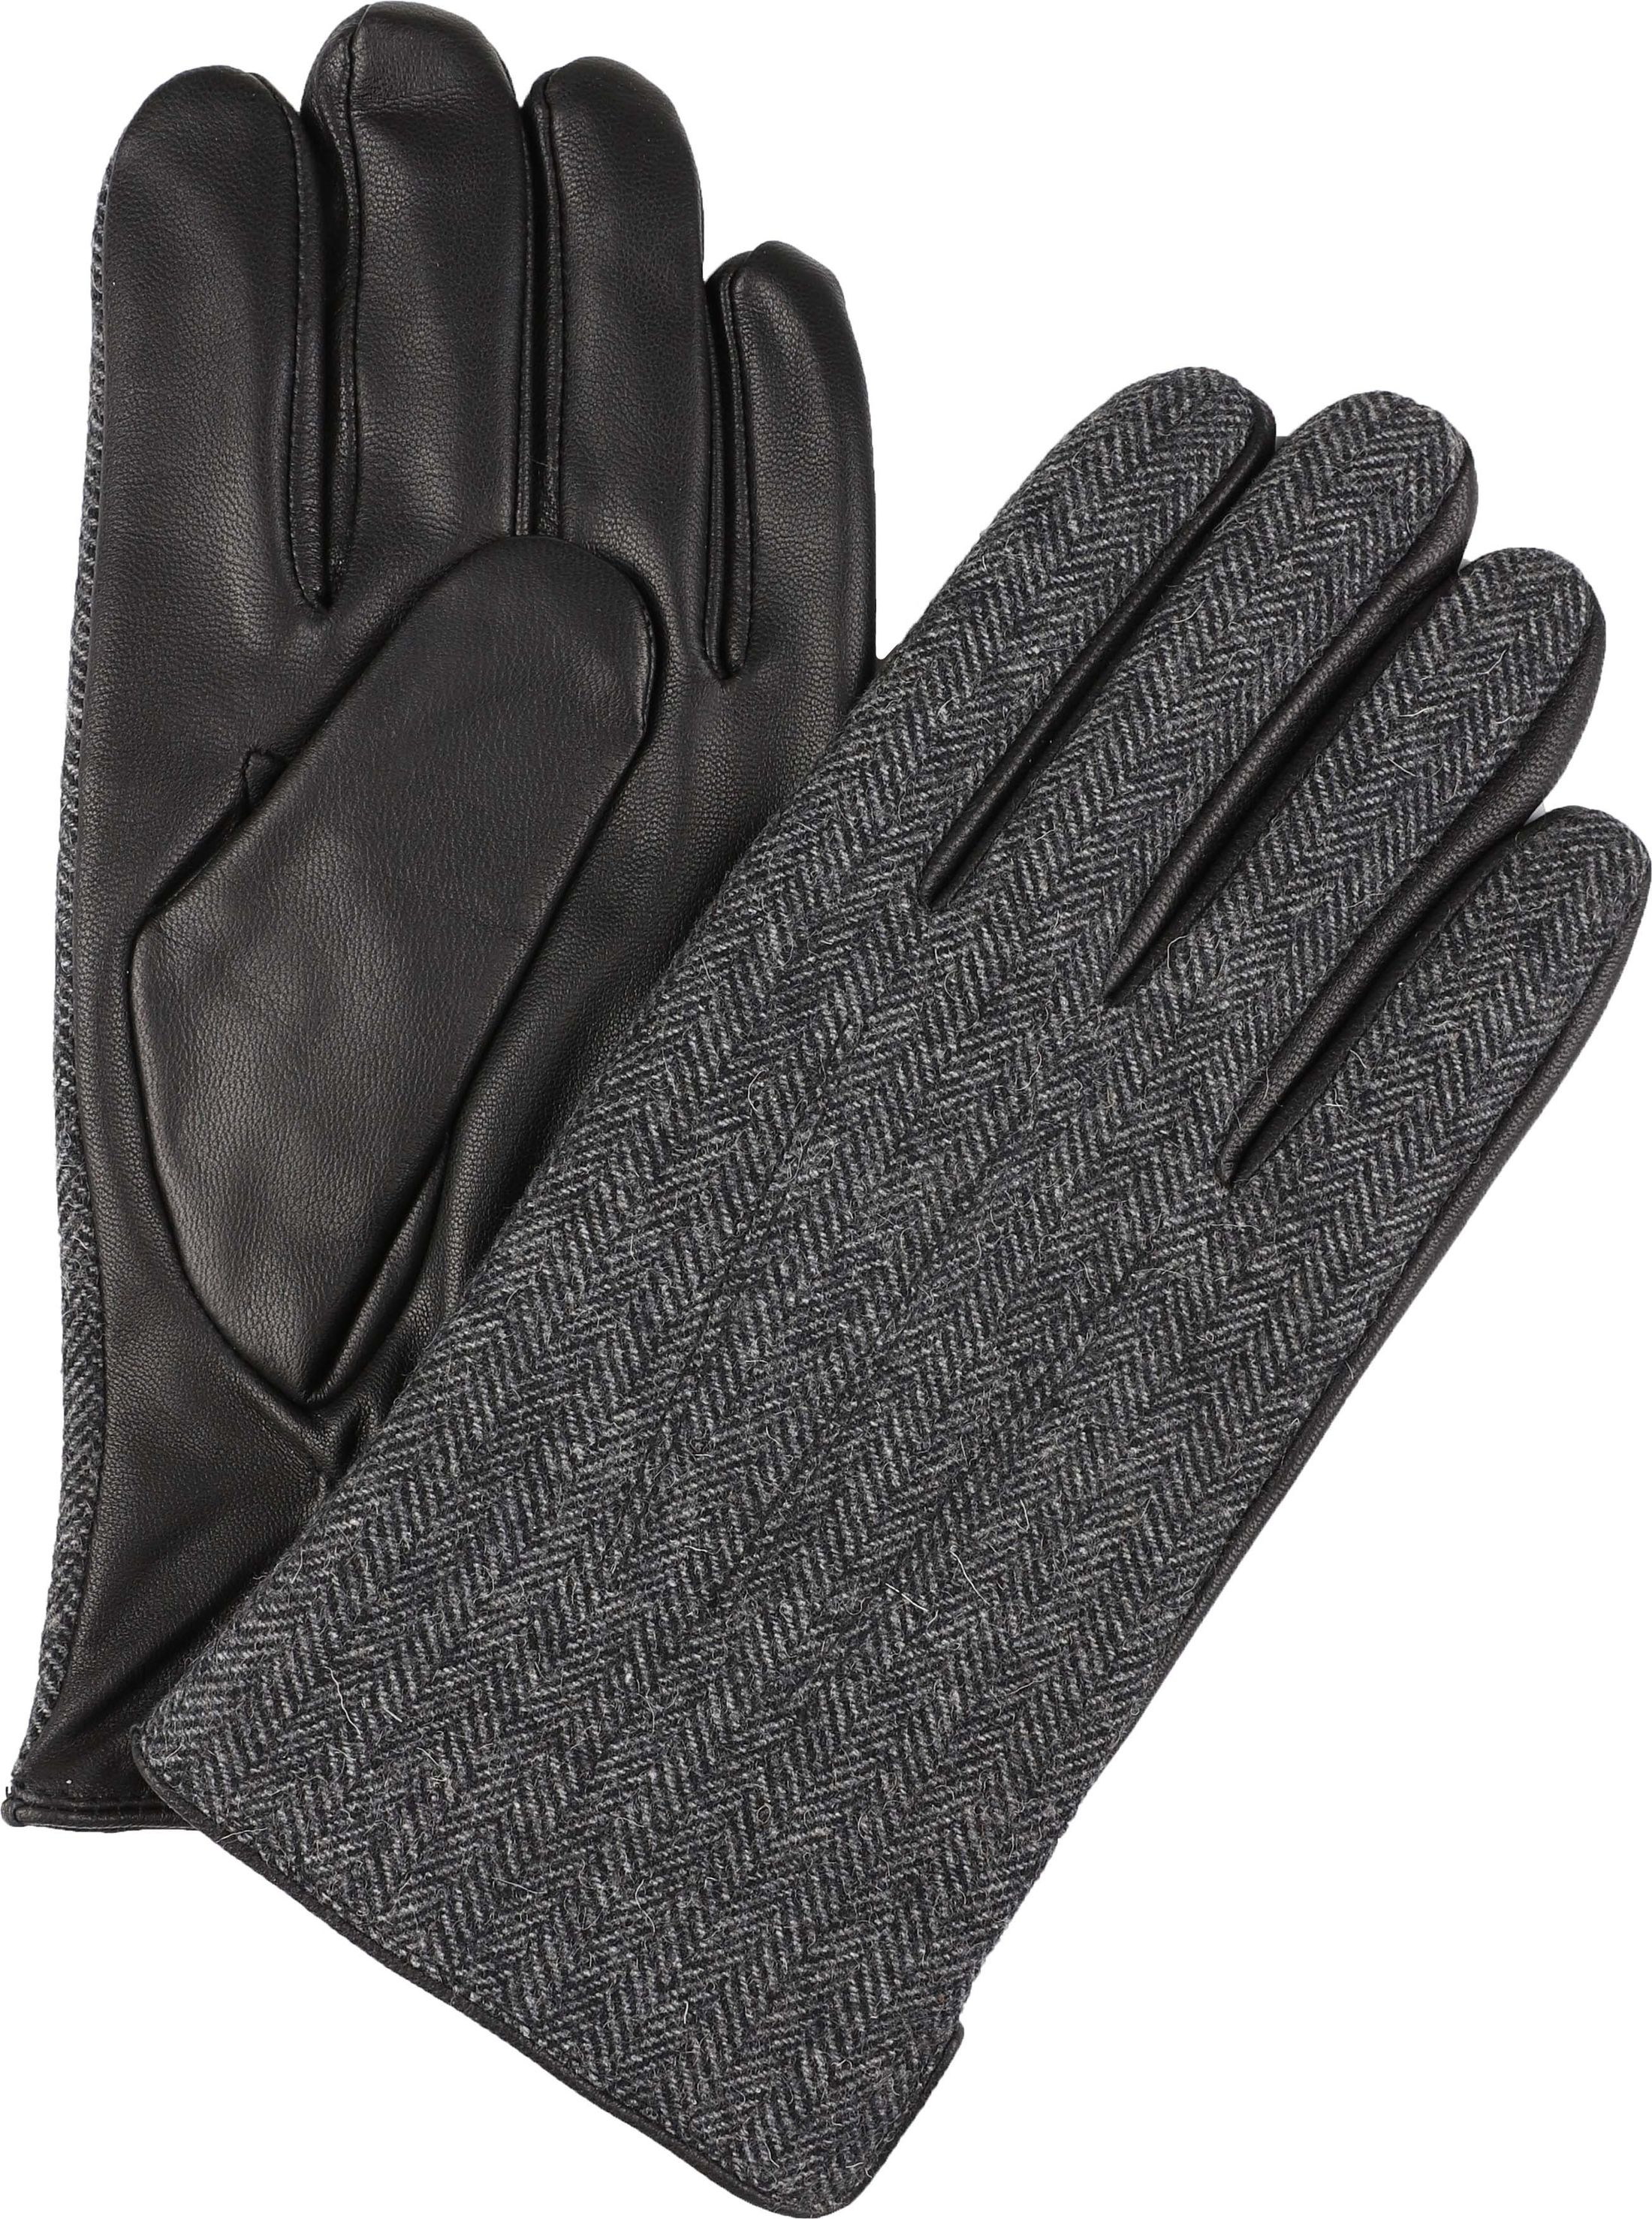 Profuomo Gloves Wool Anthracite Leather  Black size 10